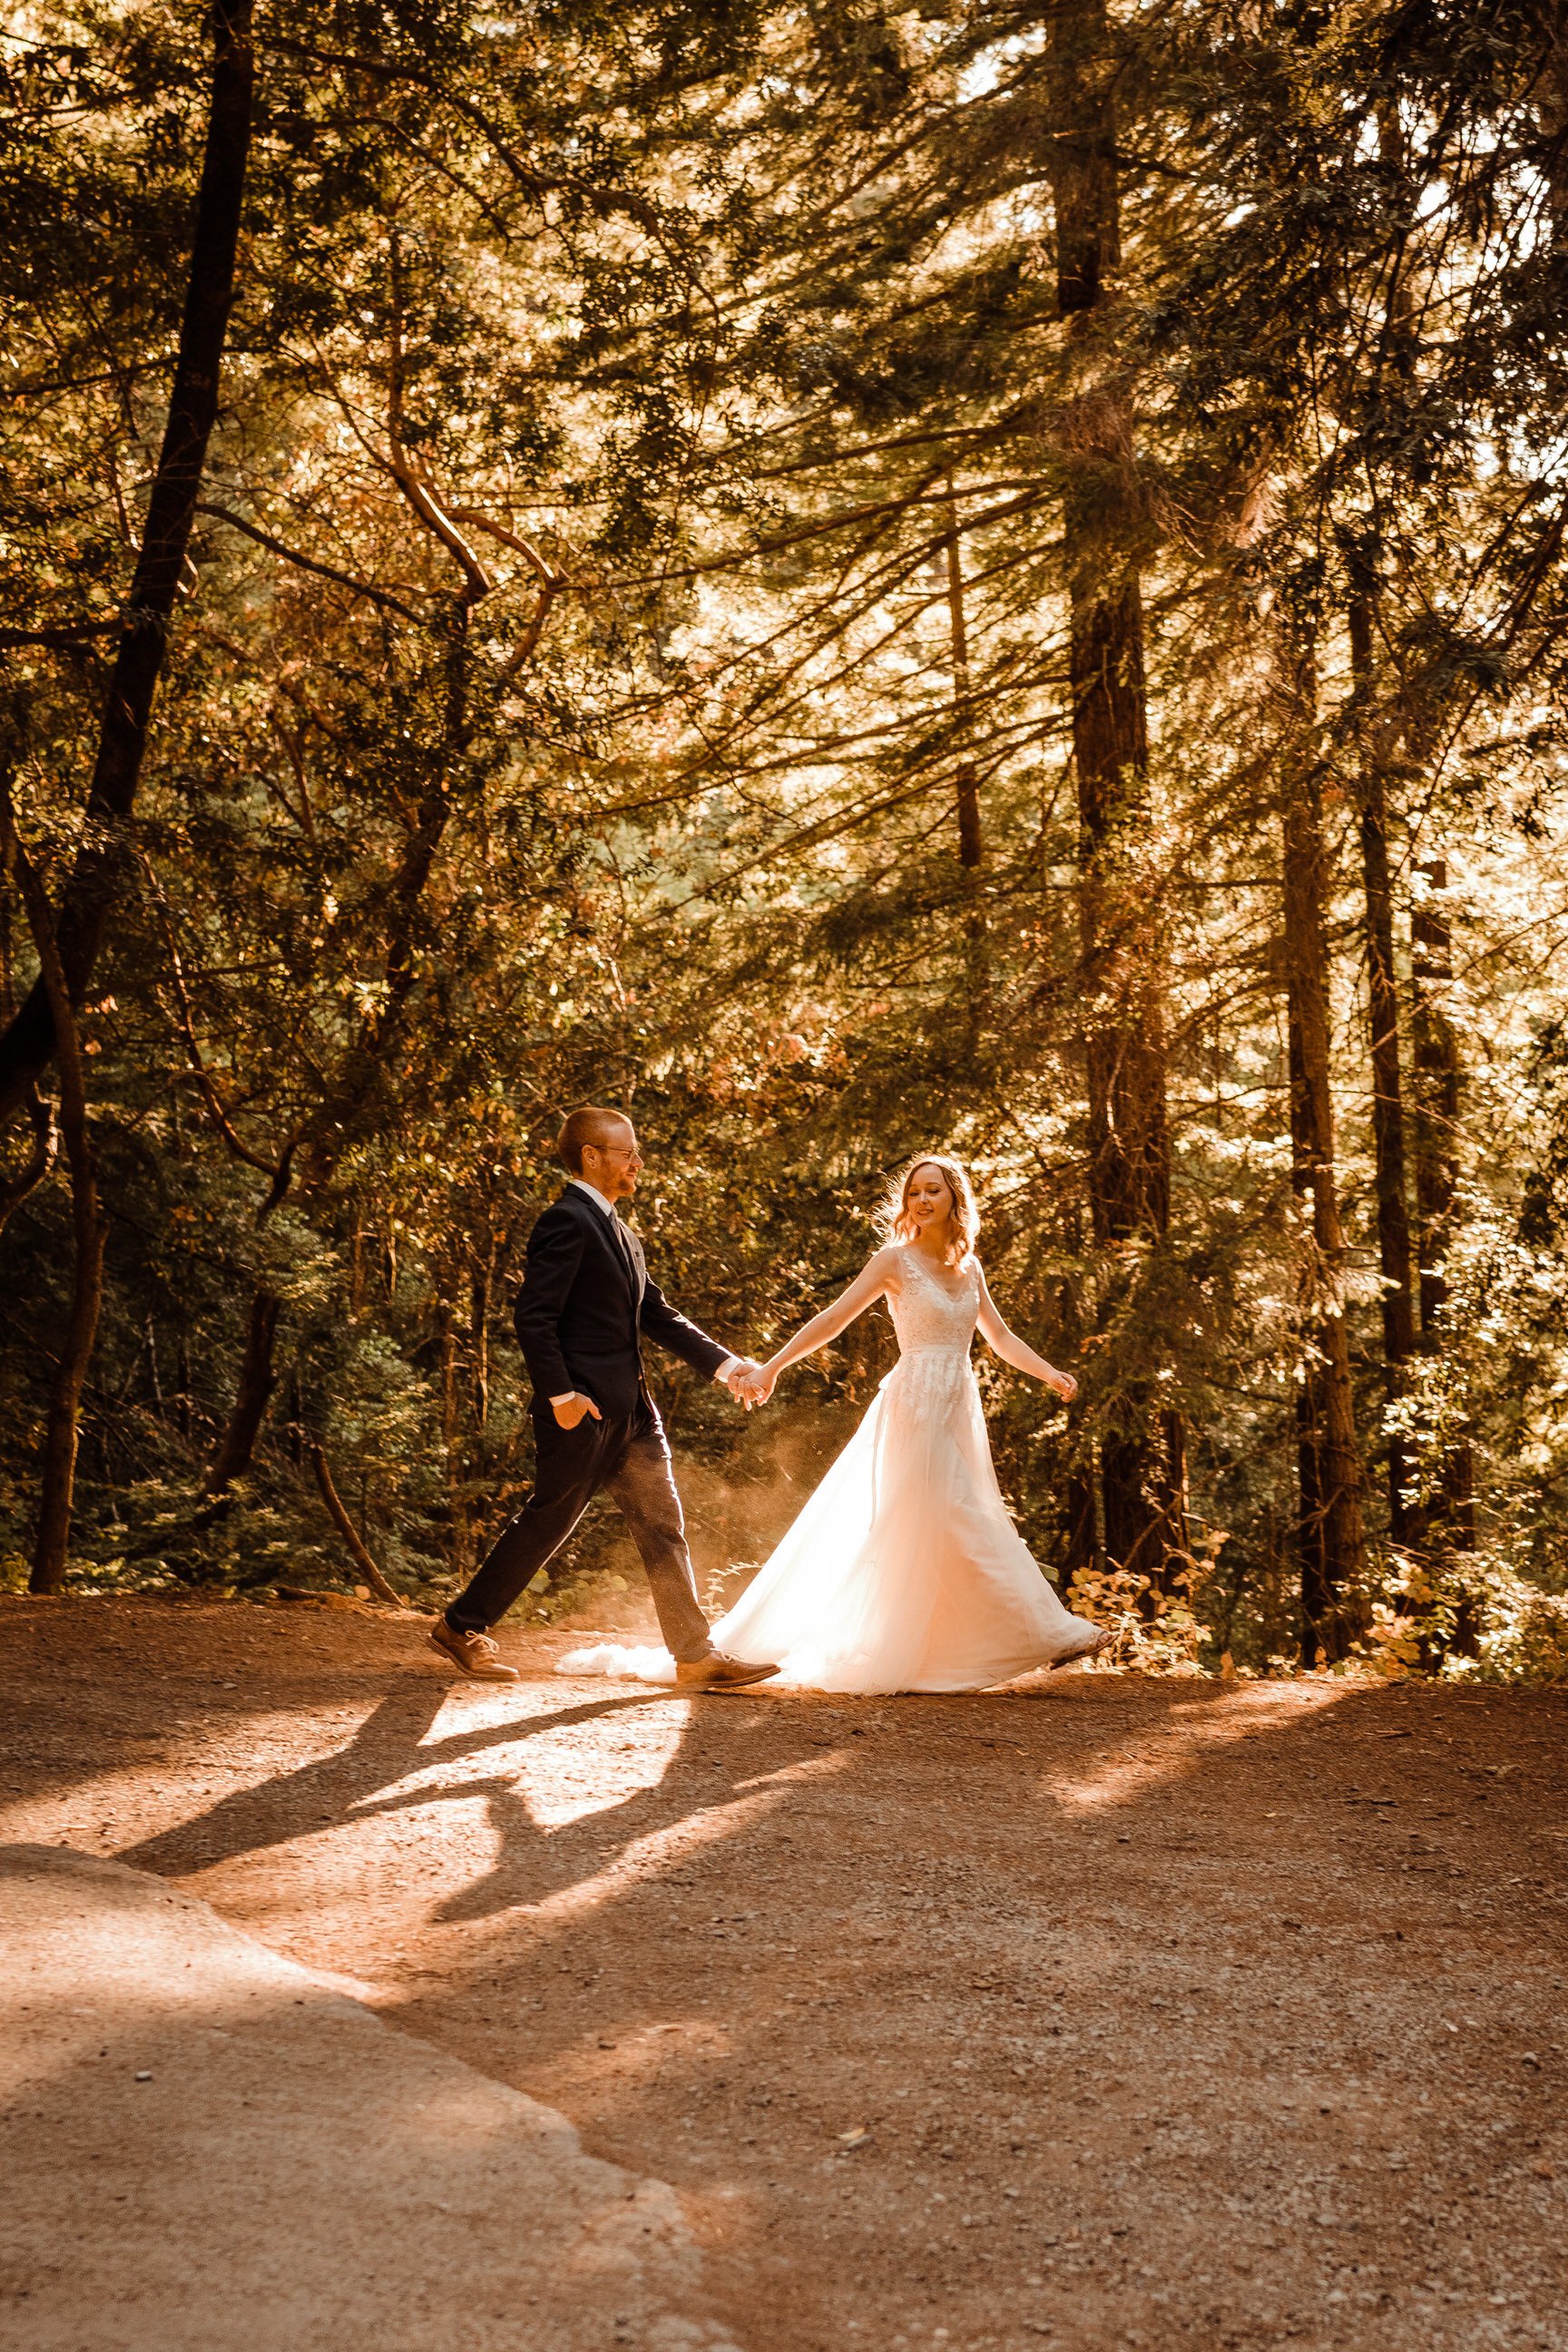 Wedding-in-the-Woods-Bride-and-Groom-Sunlit-Pictures-Beneath-Redwood-Forest (25).jpg